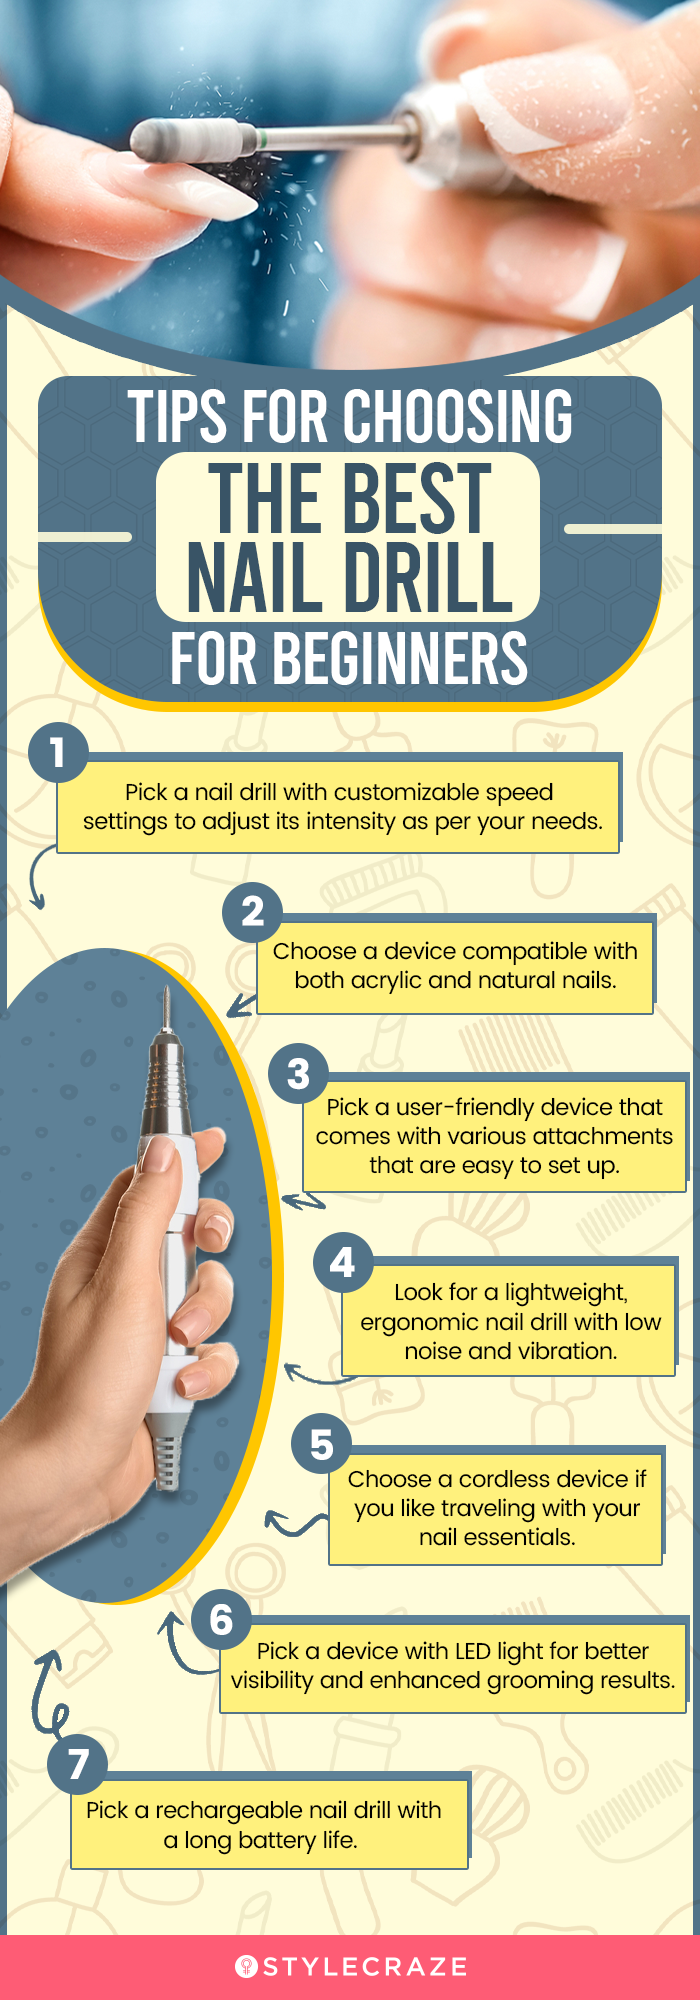 Tips For Choosing The Best Nail Drill For Beginners (infographic)